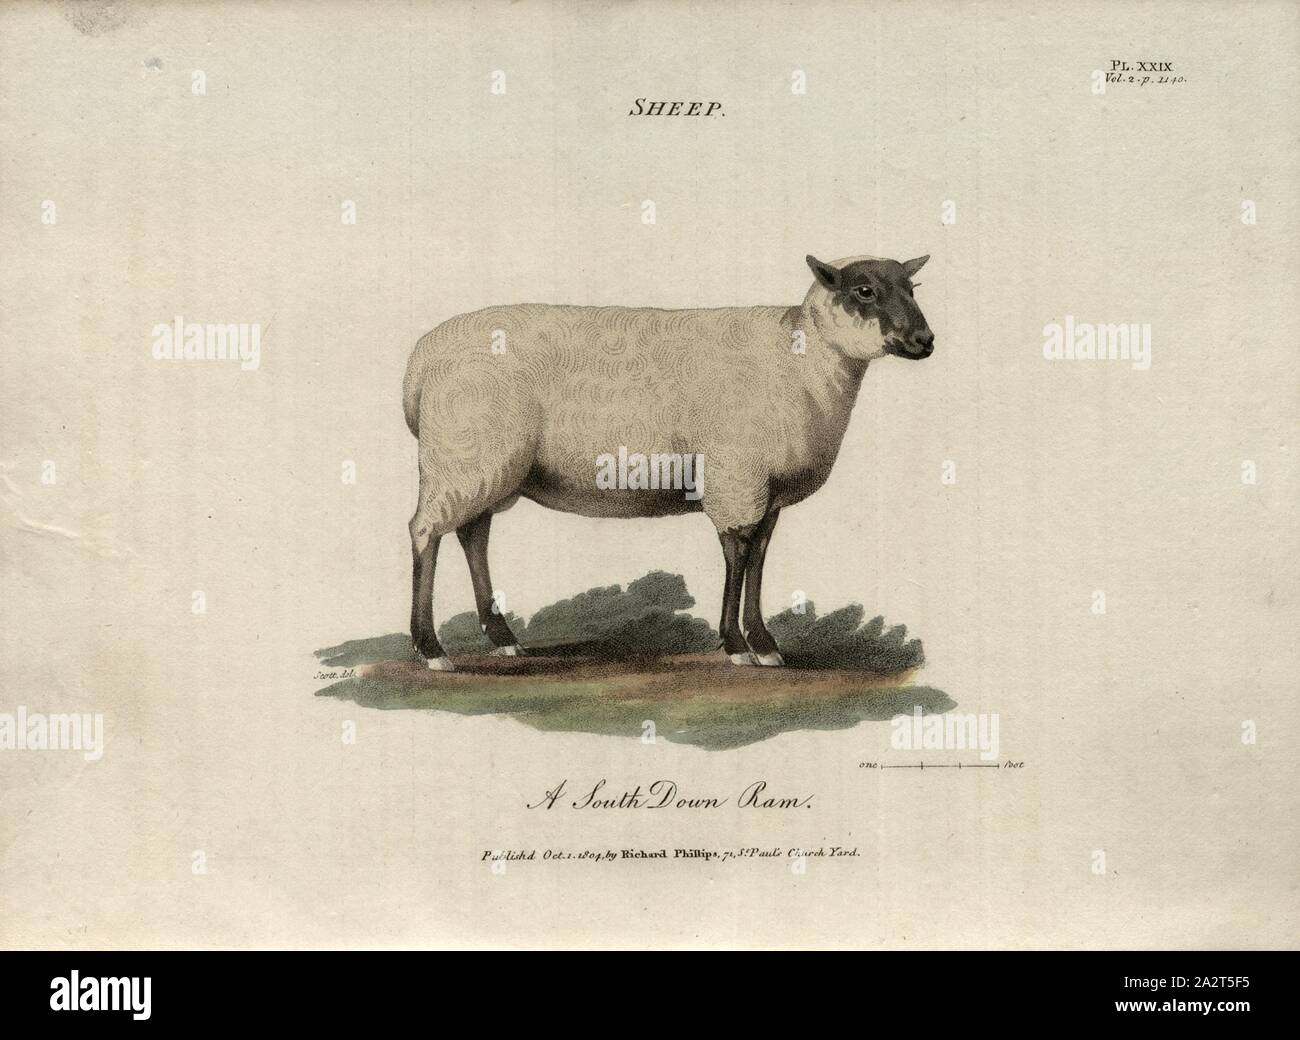 Sheep: A South Down Ram, Southdown sheep, ram, signed: Scott del, Fig. 28, Pl. XXIX, p. 1140, Scott (del.), R.W. Dickson: Practical agriculture, or, a complete system of modern husbandry: with the methods of planting, and the management of live stock. Bd. 2. London: printed for Richard Phillips; by R. Taylor and Co., 1805 Stock Photo